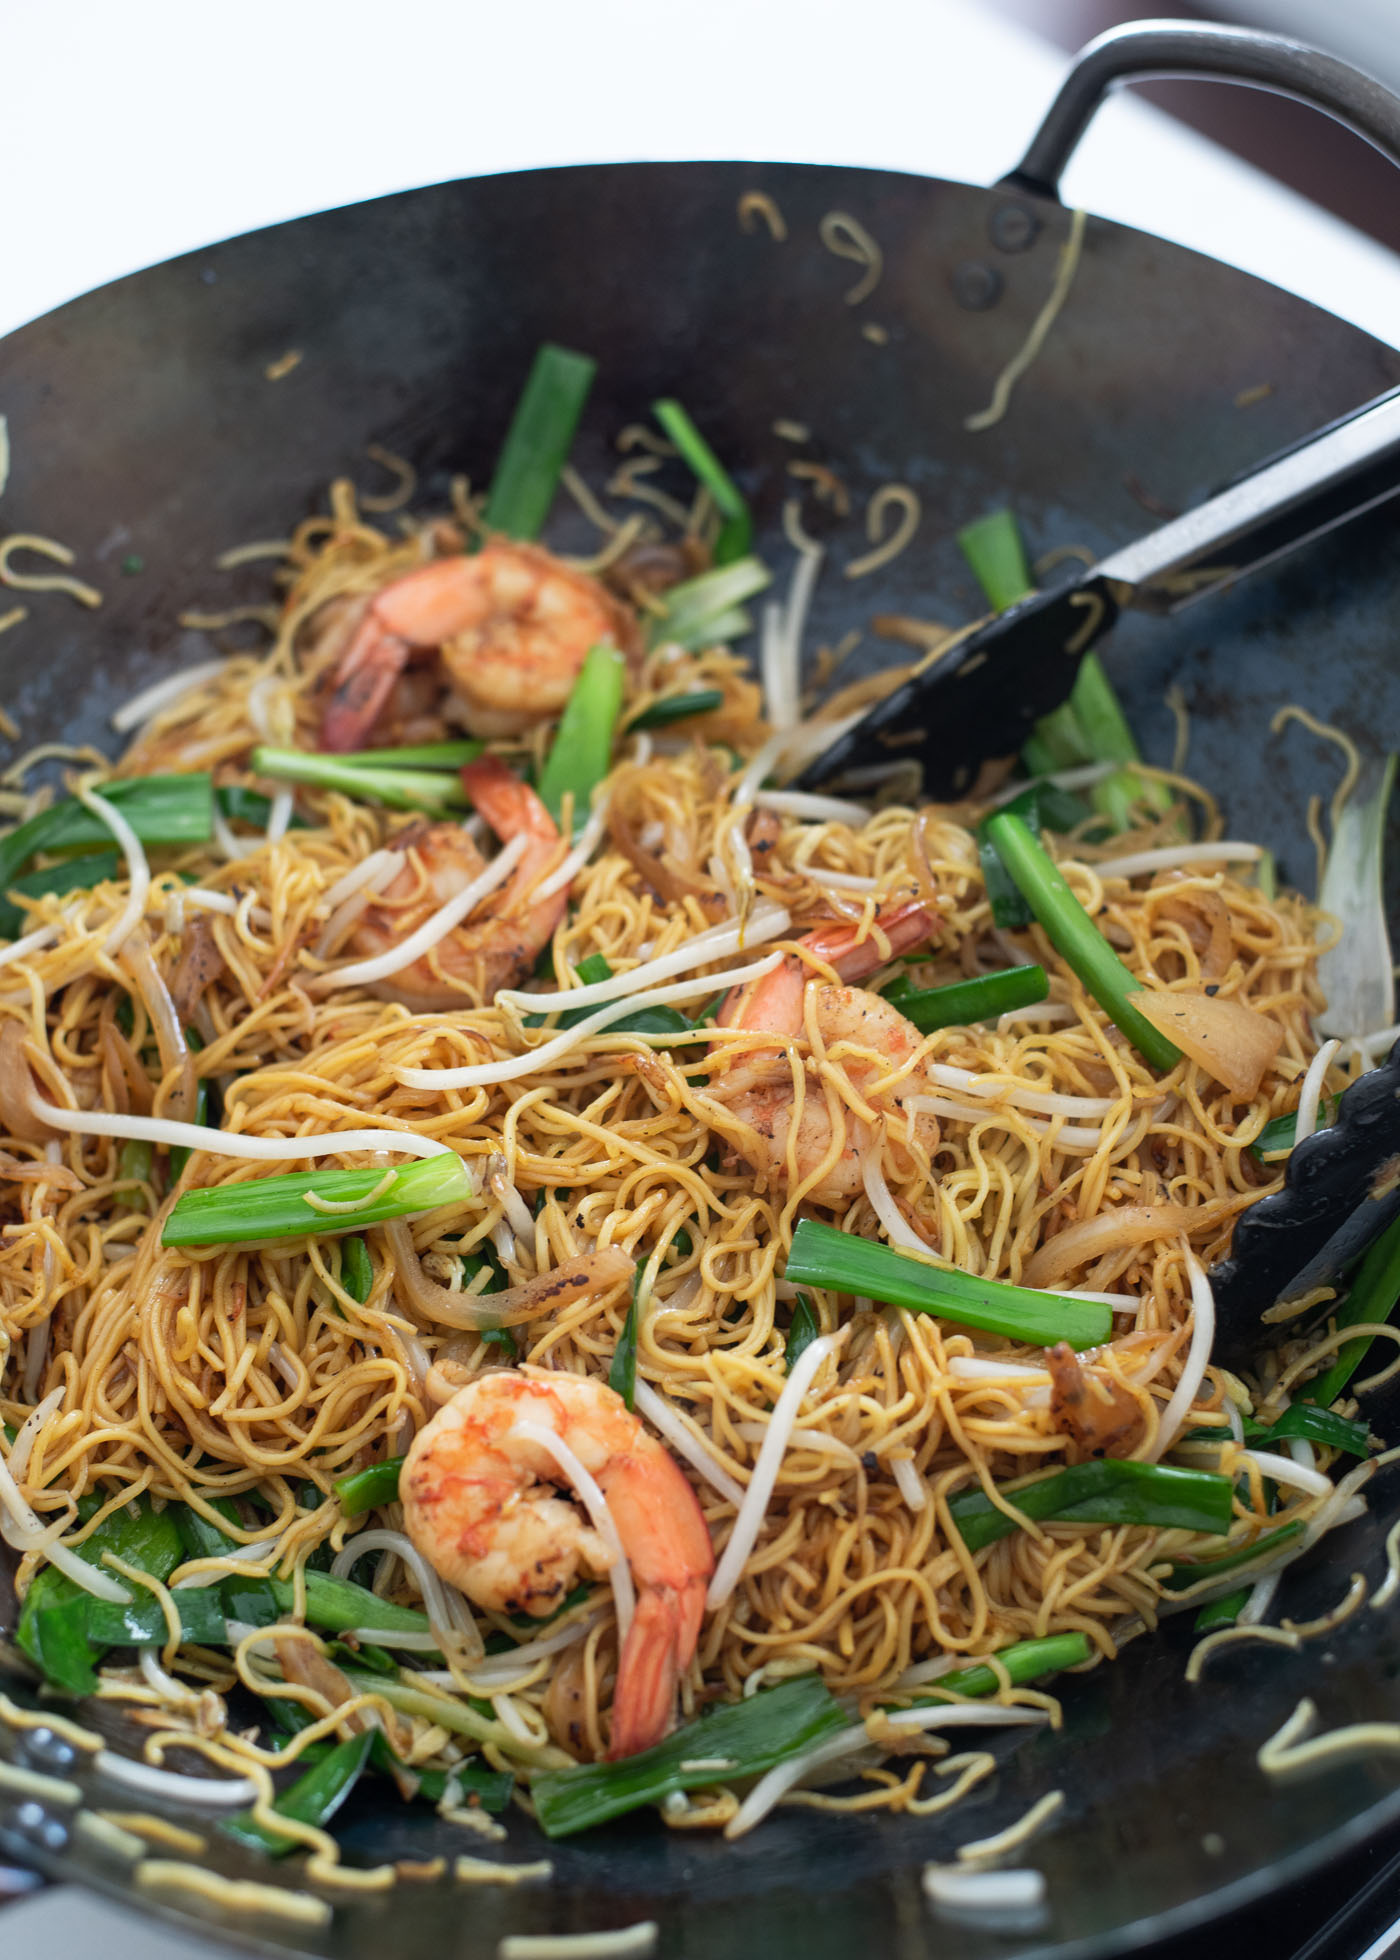 Pan fried egg noodles are tossed together with green onion and shrimp with kitchen tongs in a wok.